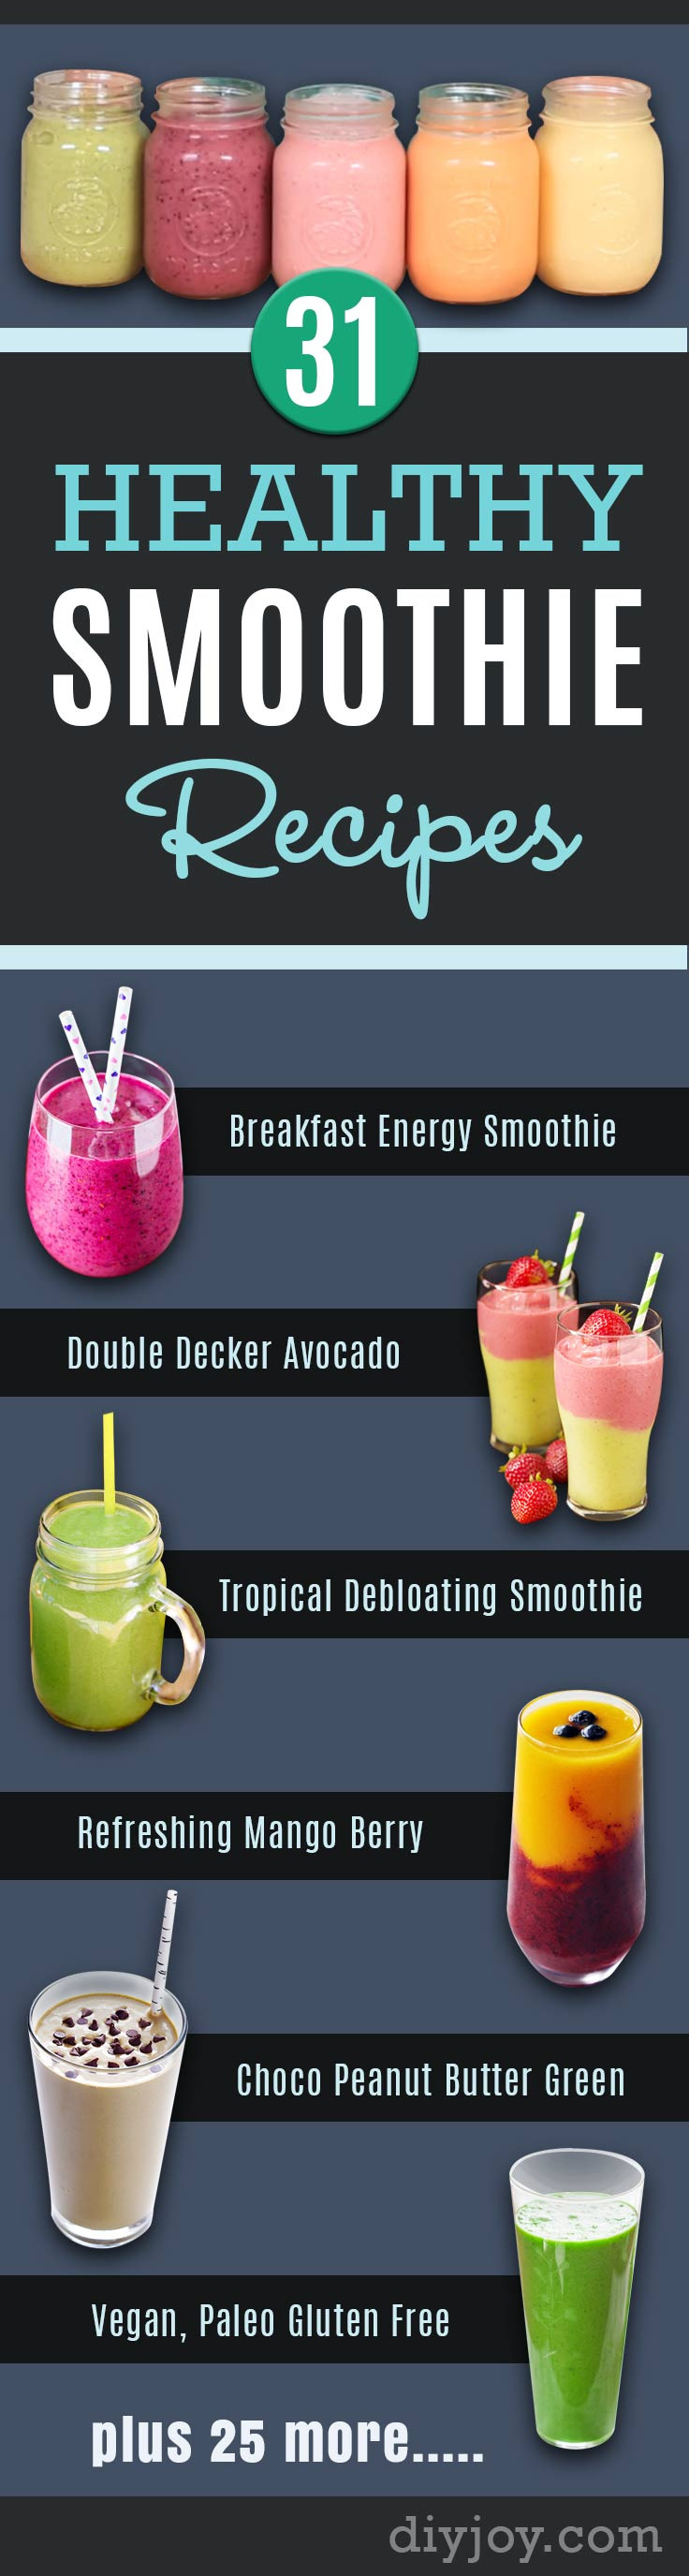 Healthy Smoothies Recipes
 31 Healthy Smoothie Recipes